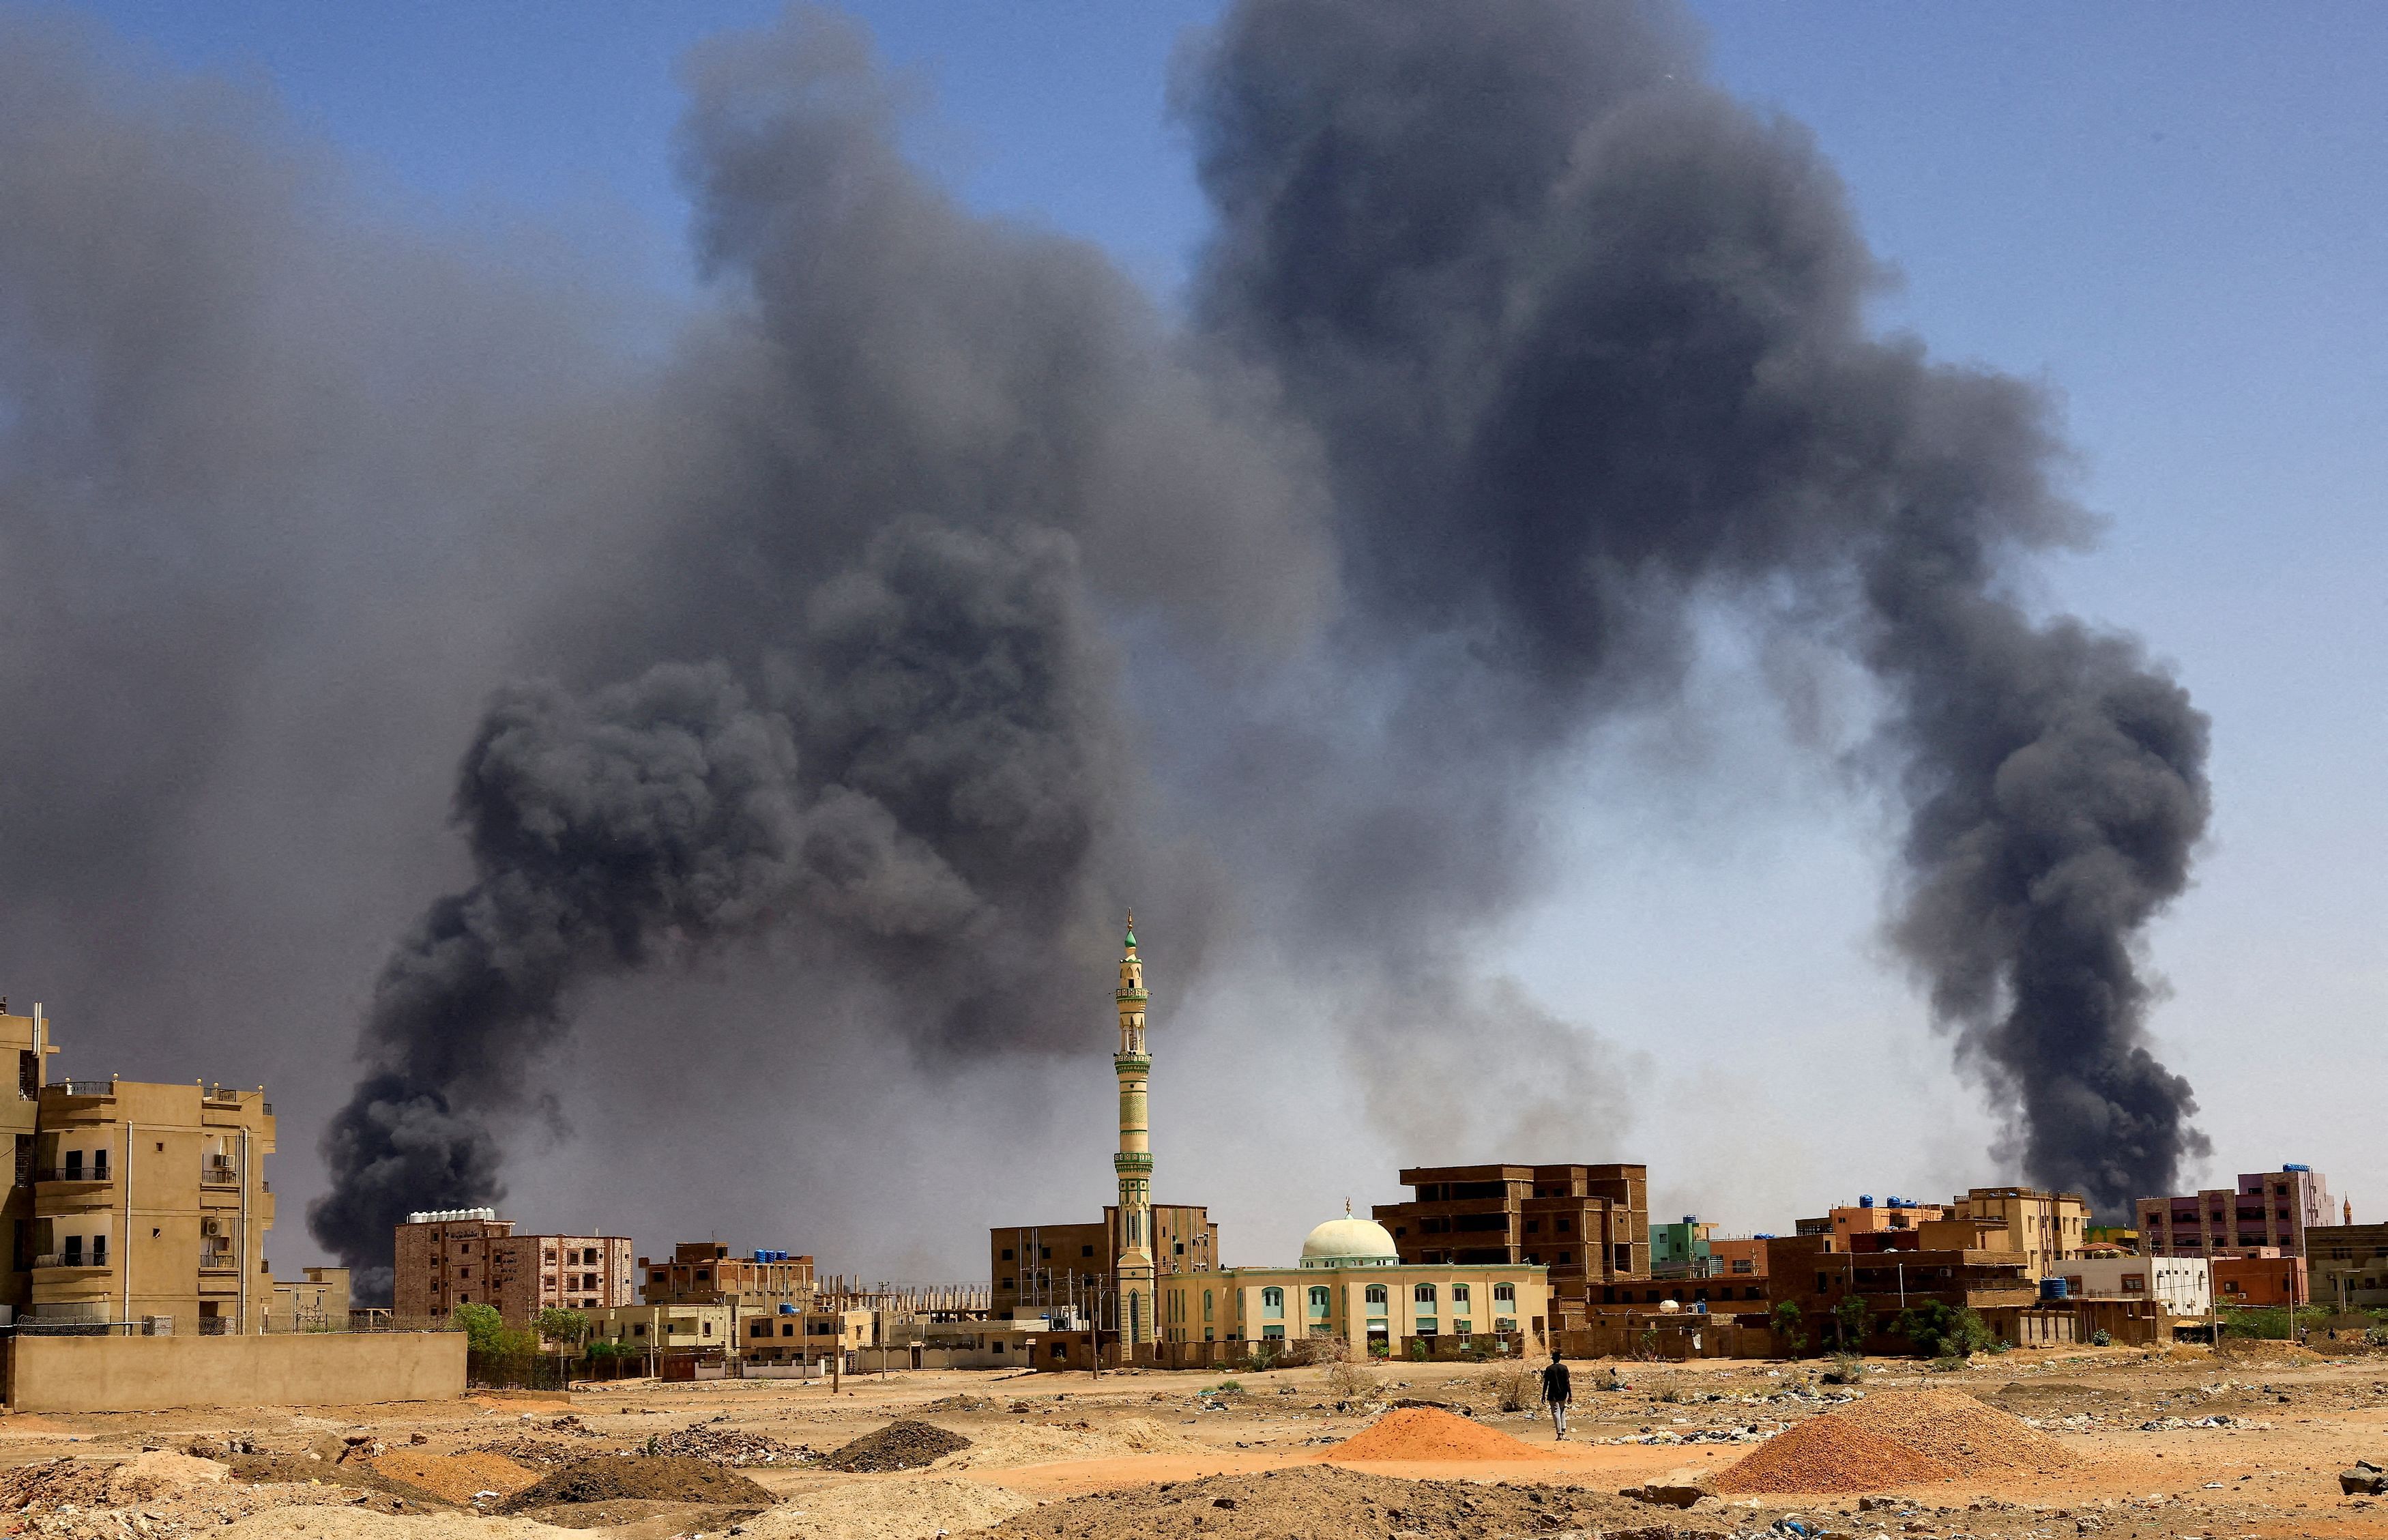  smoke rises above buildings after aerial bombardment in Khartoum North. Credit: Reuters Photo